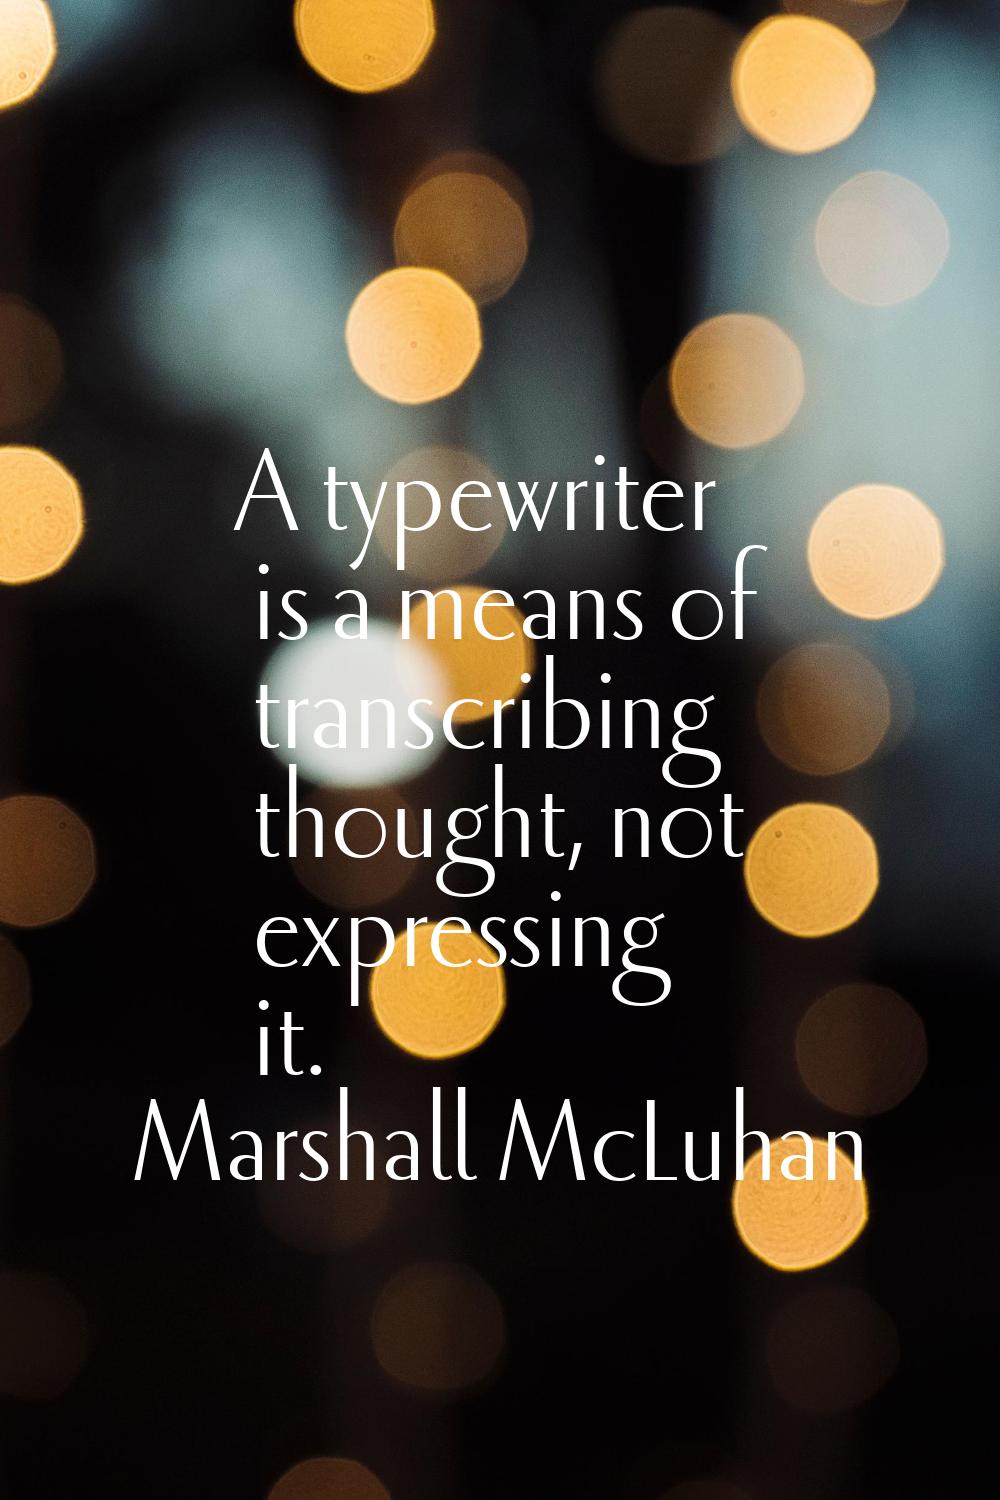 A typewriter is a means of transcribing thought, not expressing it.